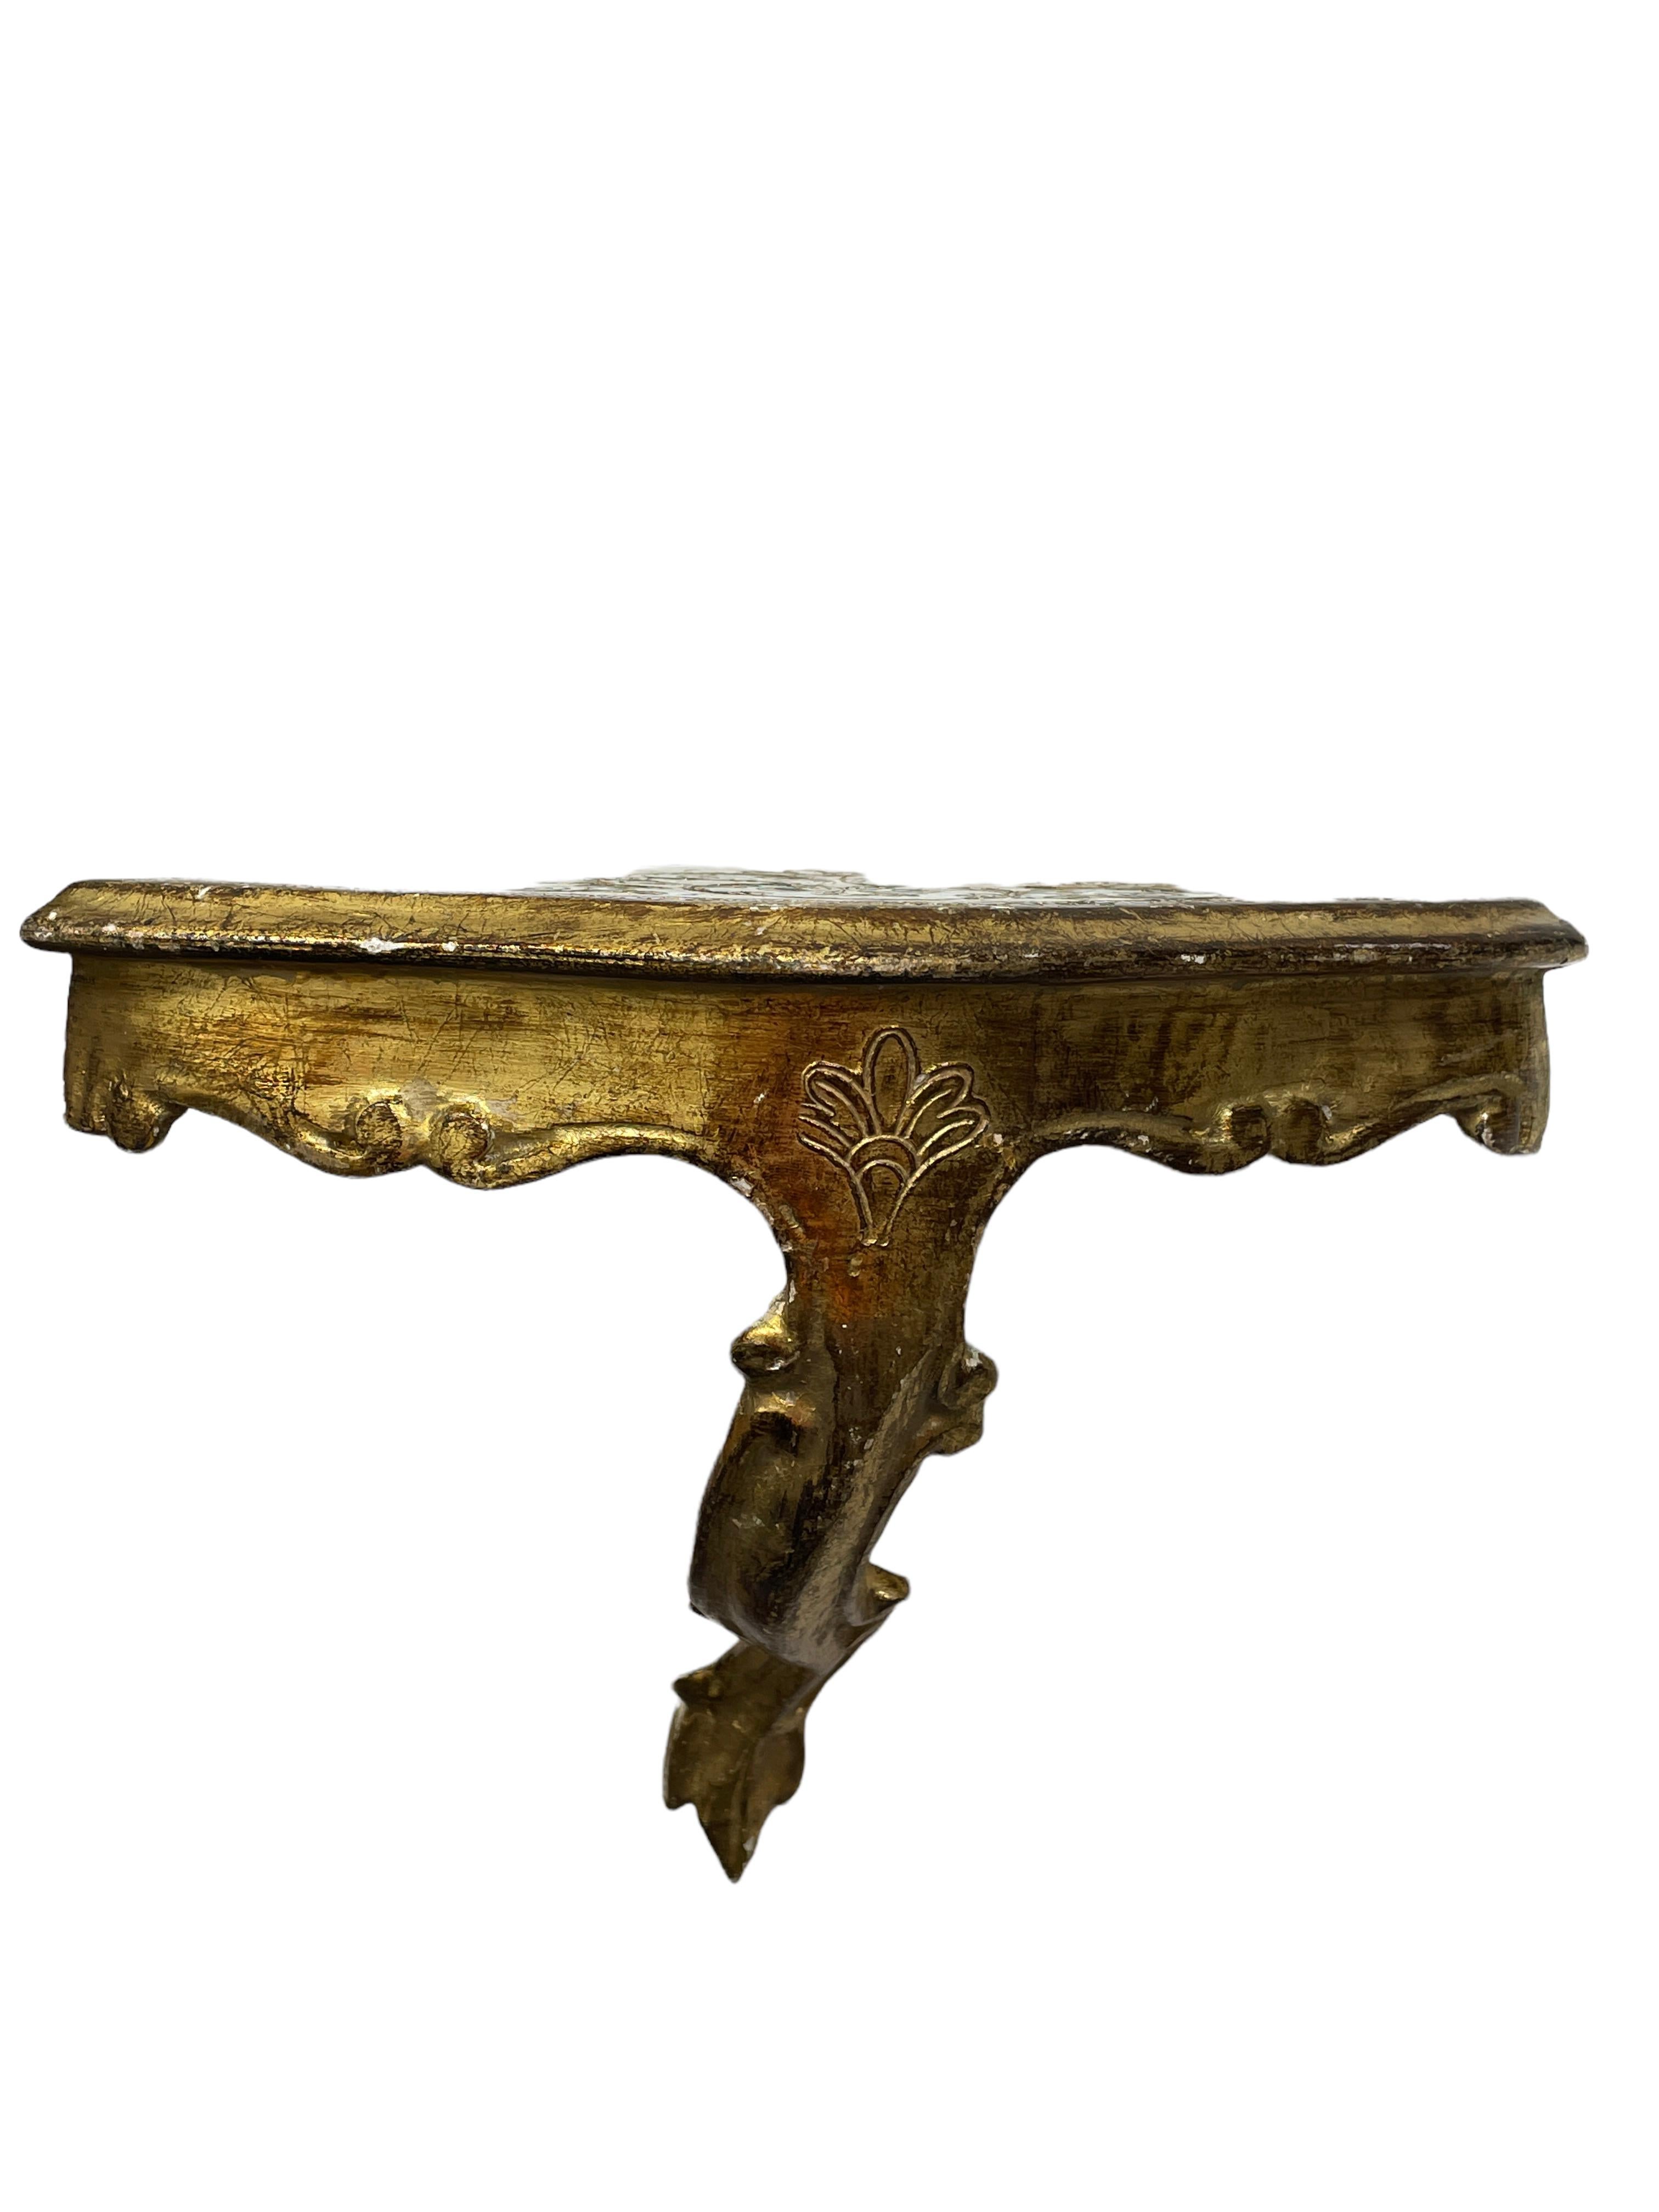 Vintage Florence Wall Corner Shelf Console, Gilded Carved Wood, Florentine Style For Sale 4